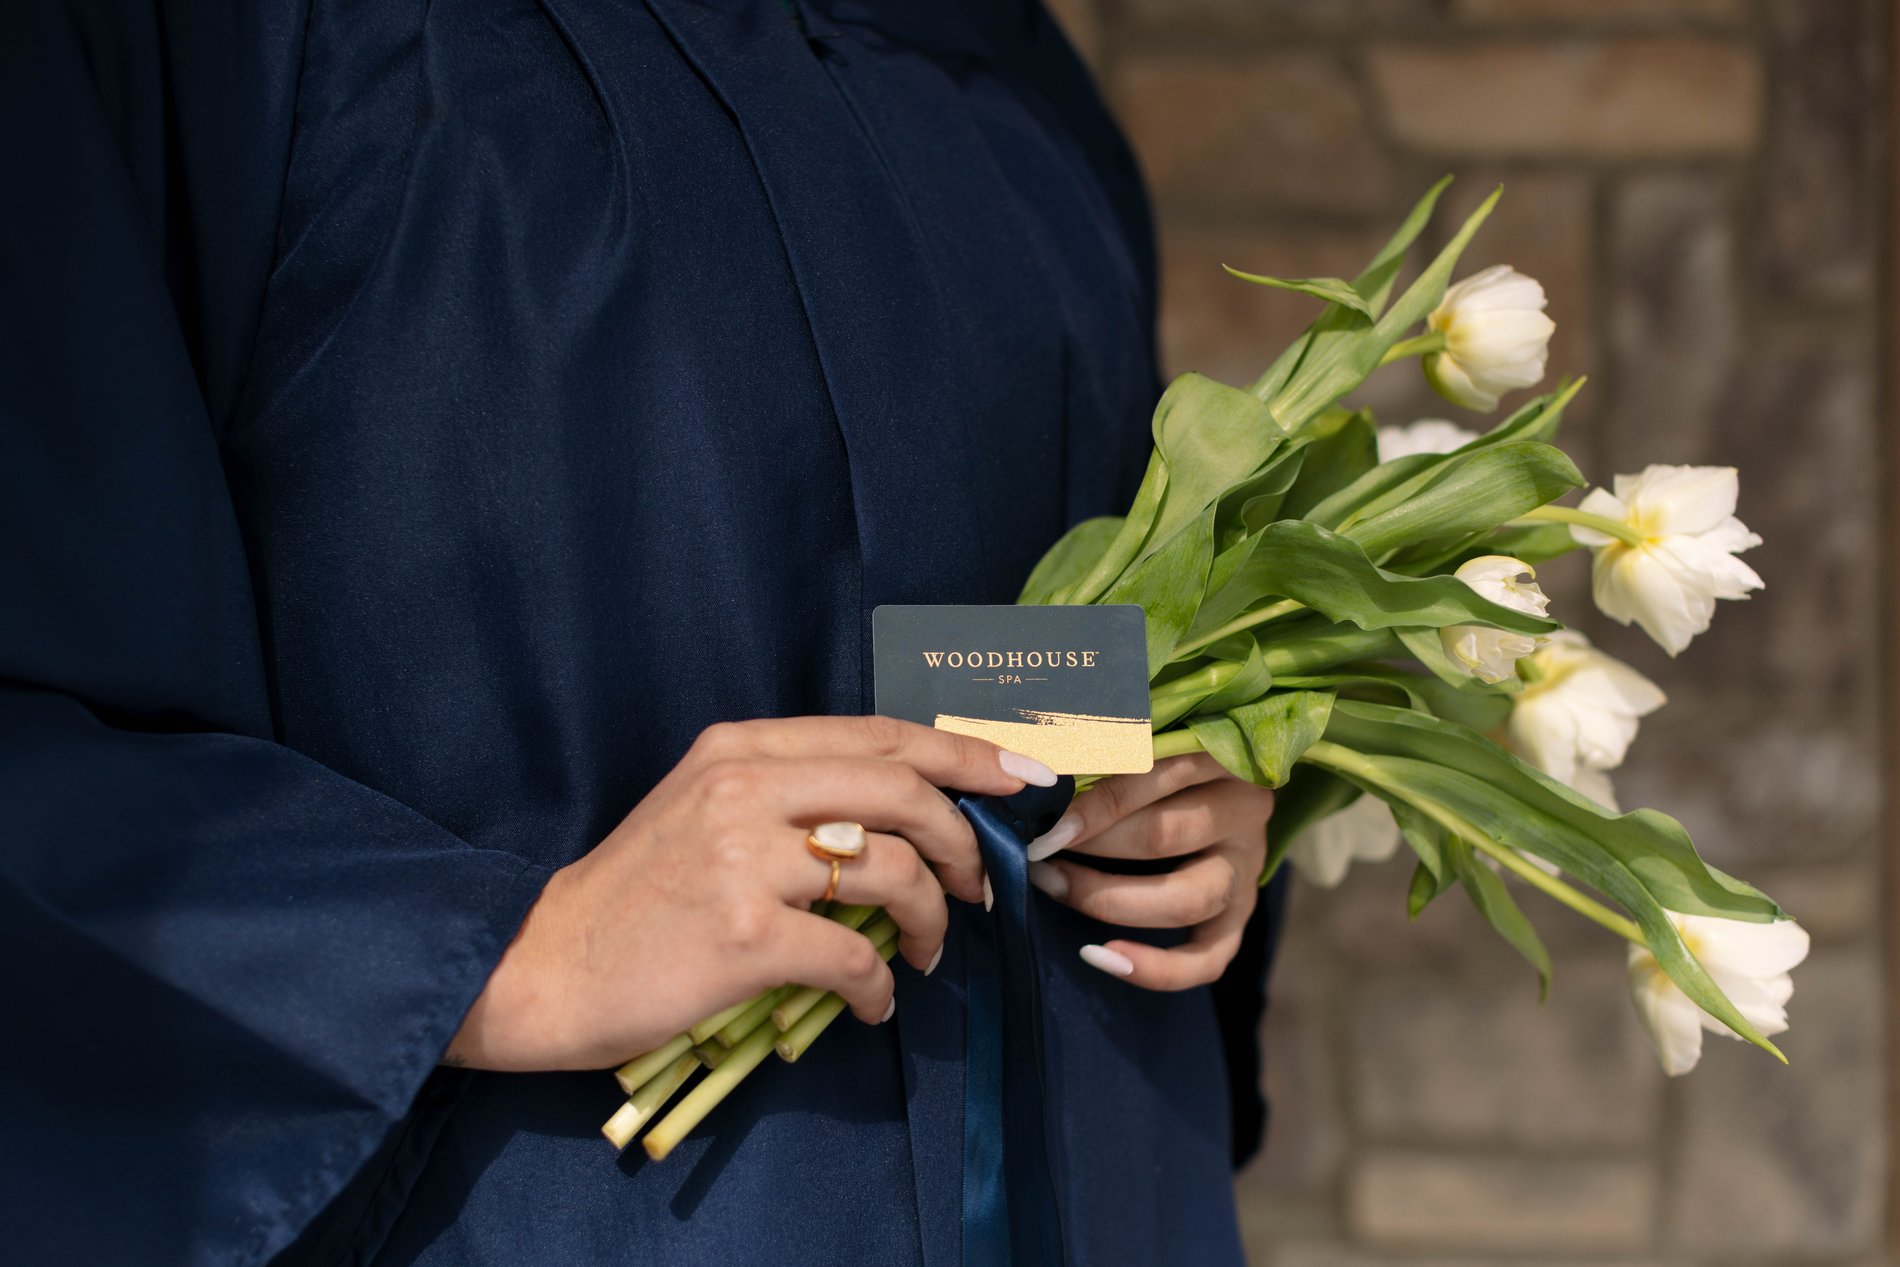 graduate holding Woodhouse Spa gift card